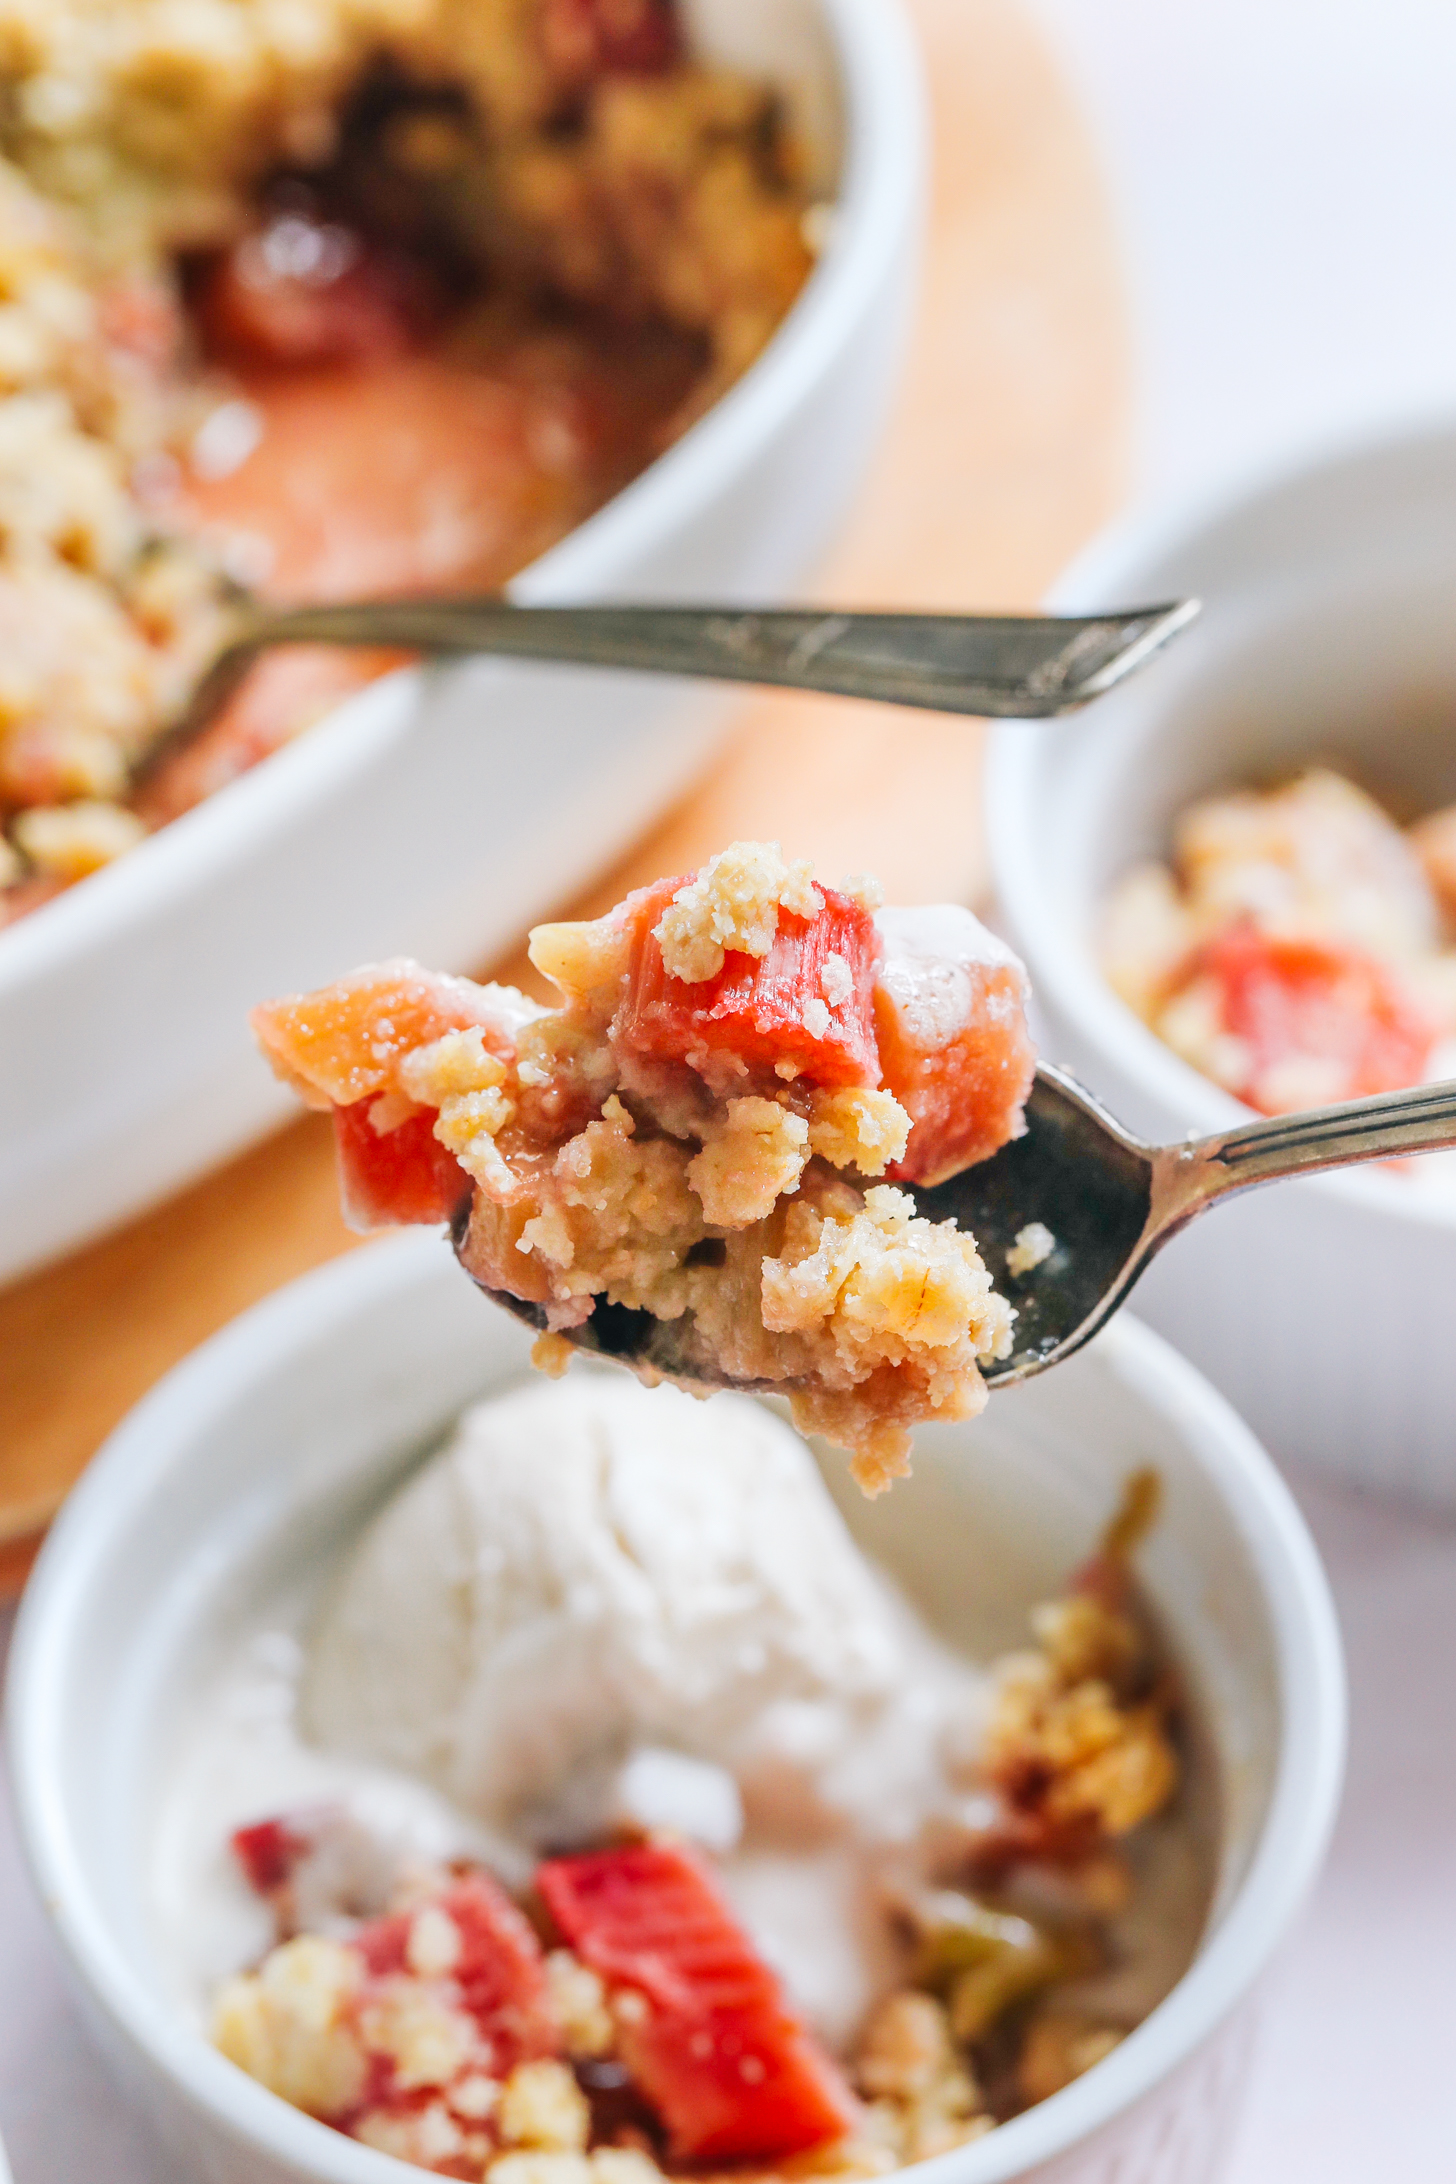 Spoon holding a bite of rhubarb crisp over a bowl